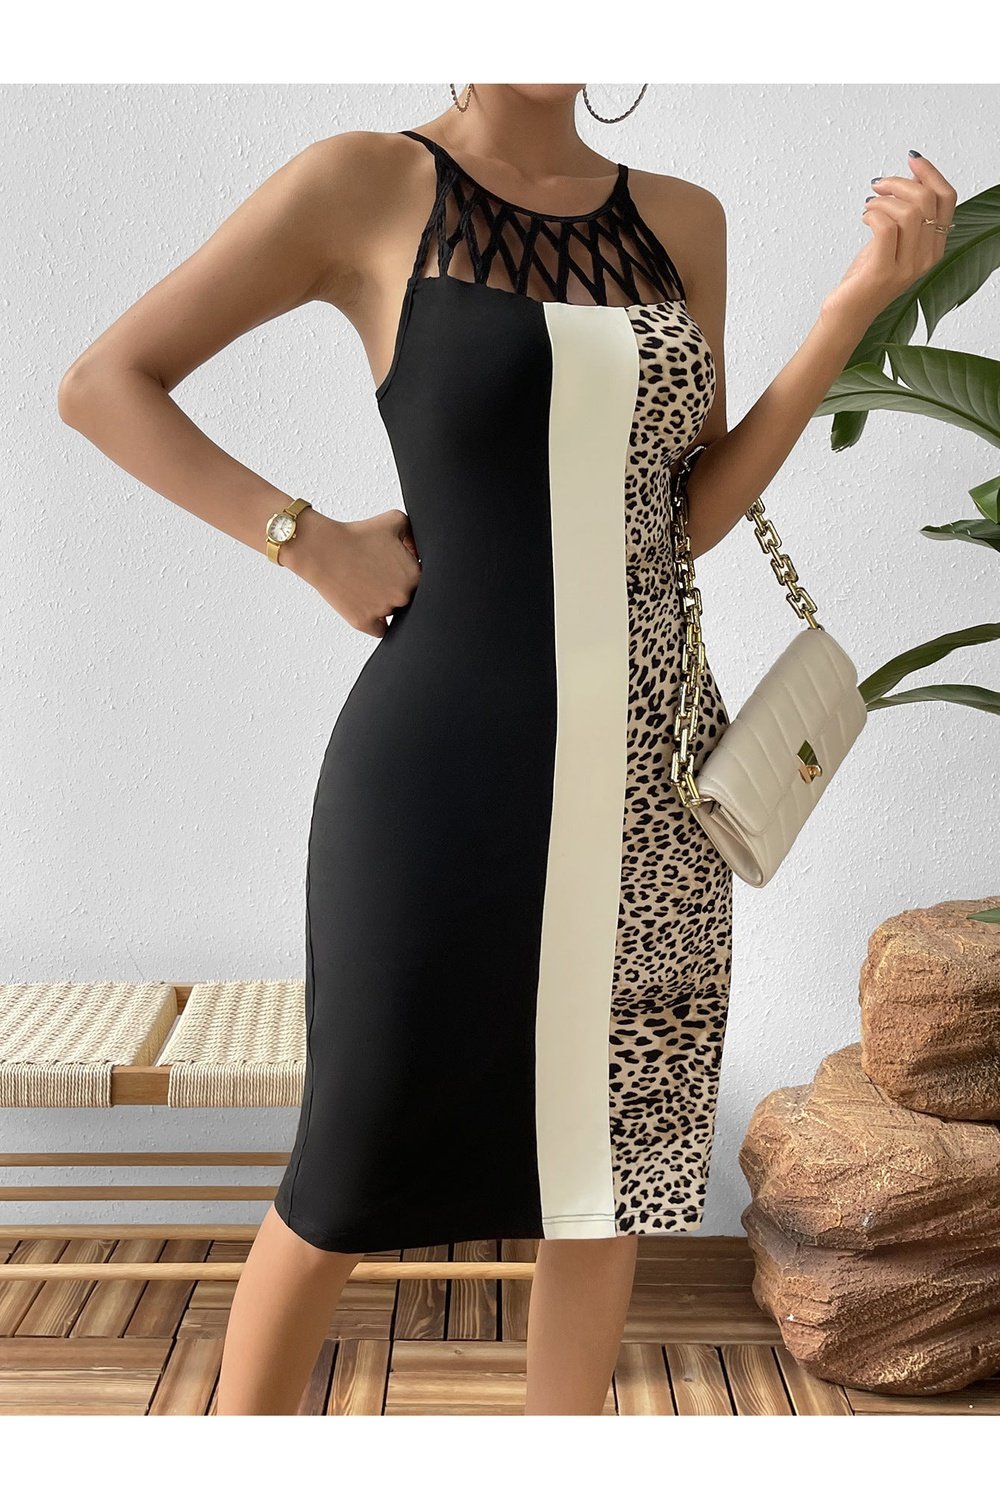 Leopard Color Block Cutout Sleeveless Knee-Length Dress - Casual & Maxi Dresses - FITGGINS